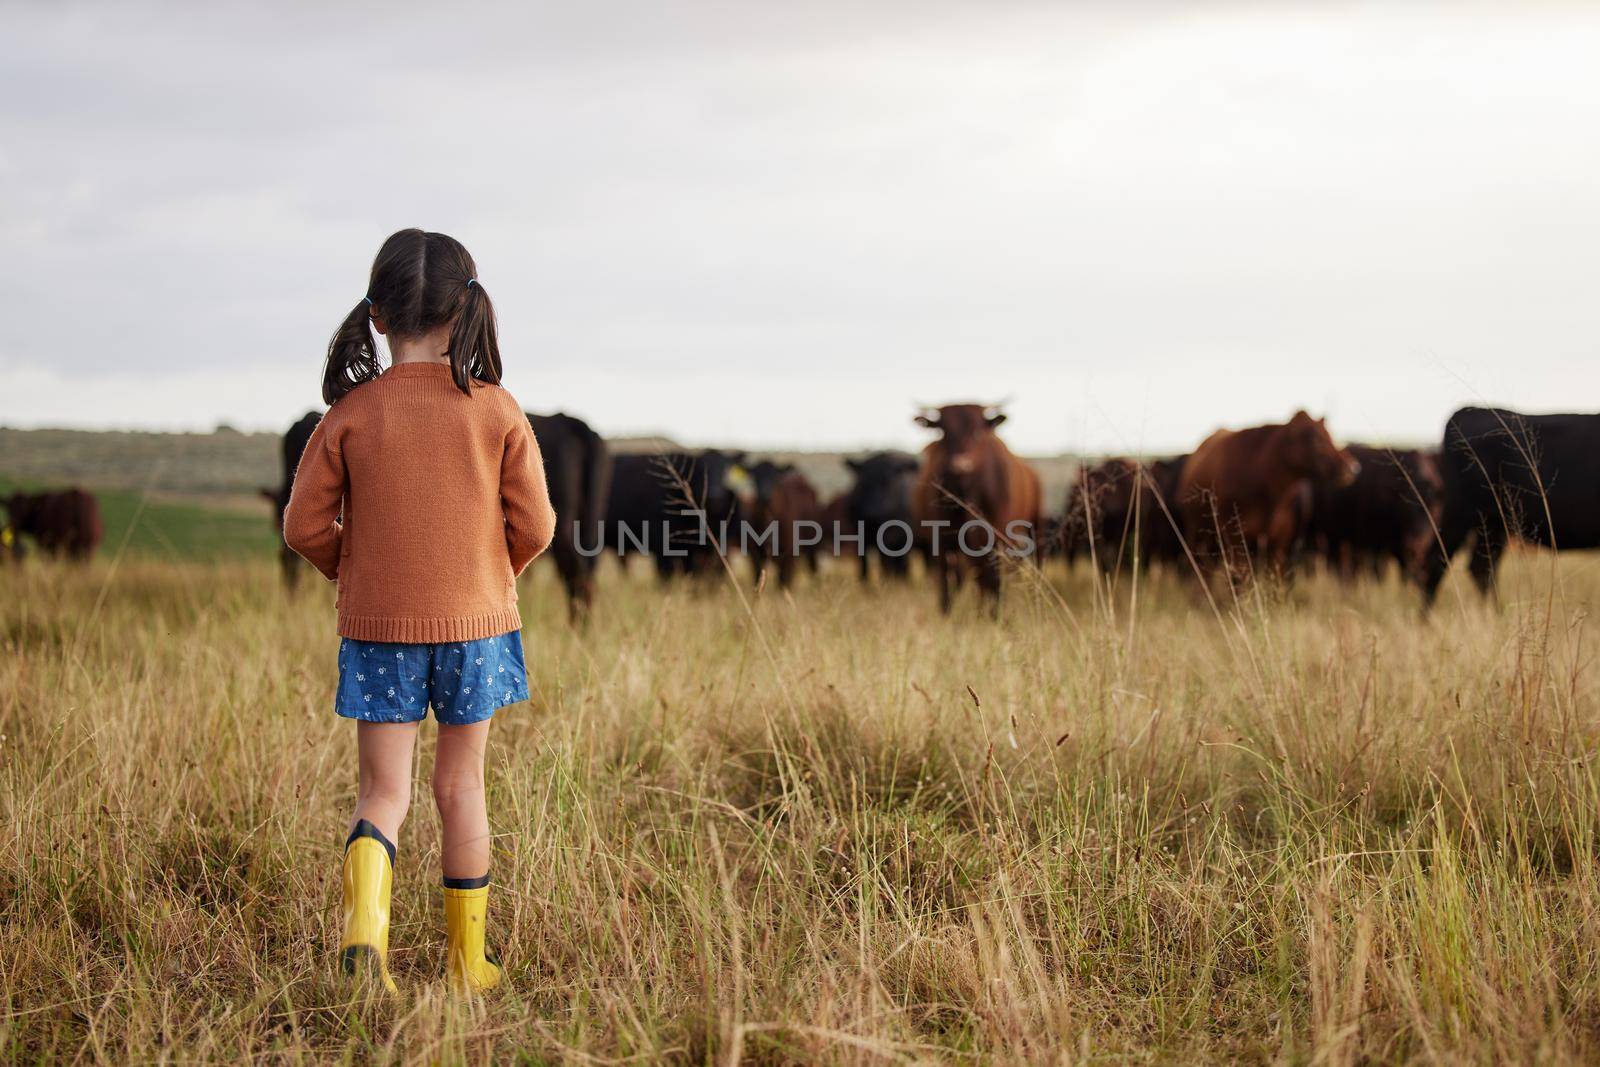 Little girl learning agriculture on a sustainability farm with cattle and exploring nature outdoors. Back view of a carefree child or kid watching cows or farmland animals enjoying the countryside.